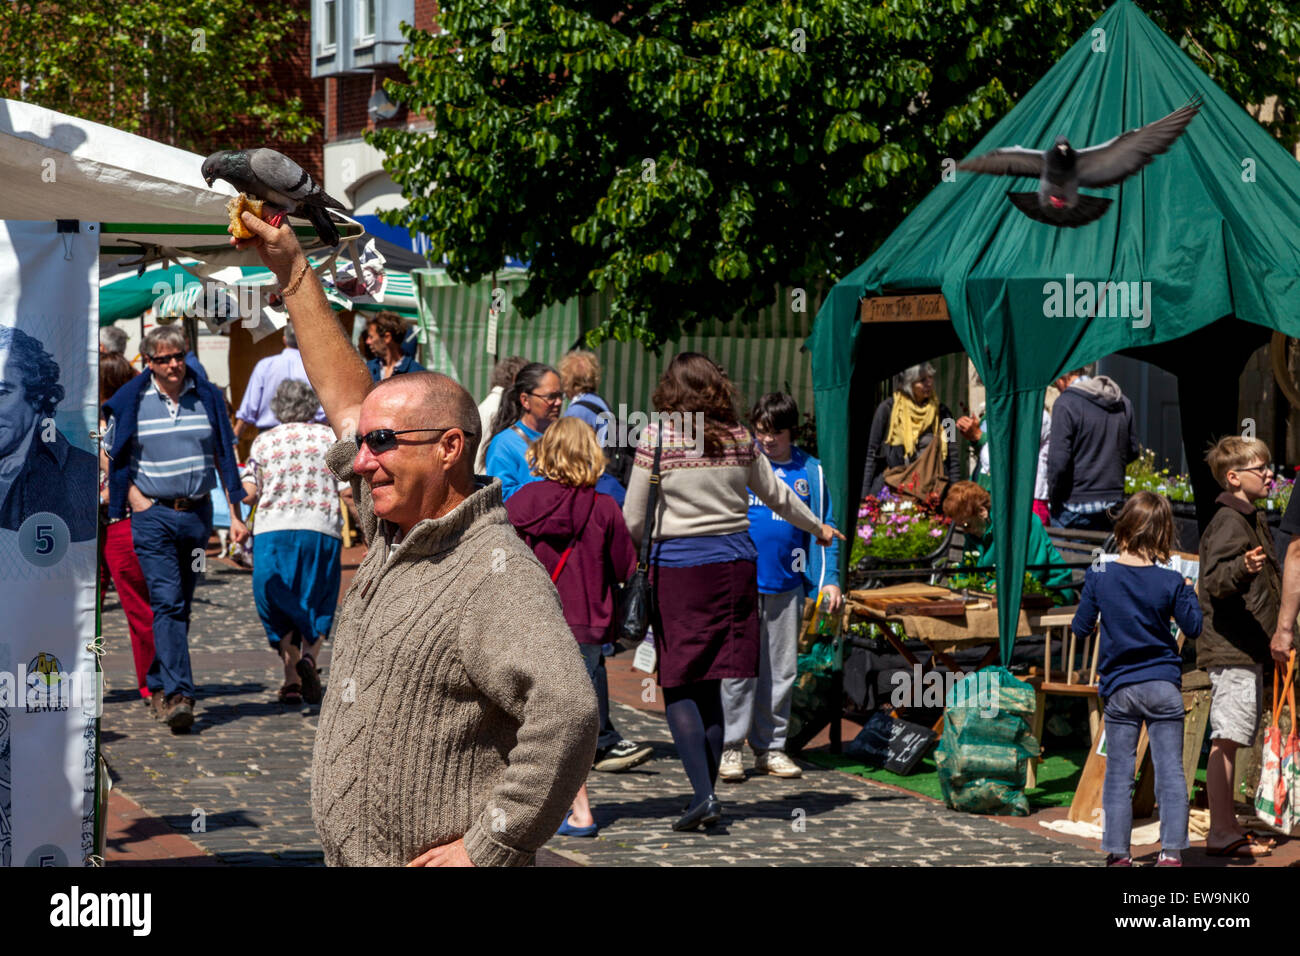 A Man Feeding Pigeons, Lewes Farmer's Market, Lewes, Sussex, England Stock Photo